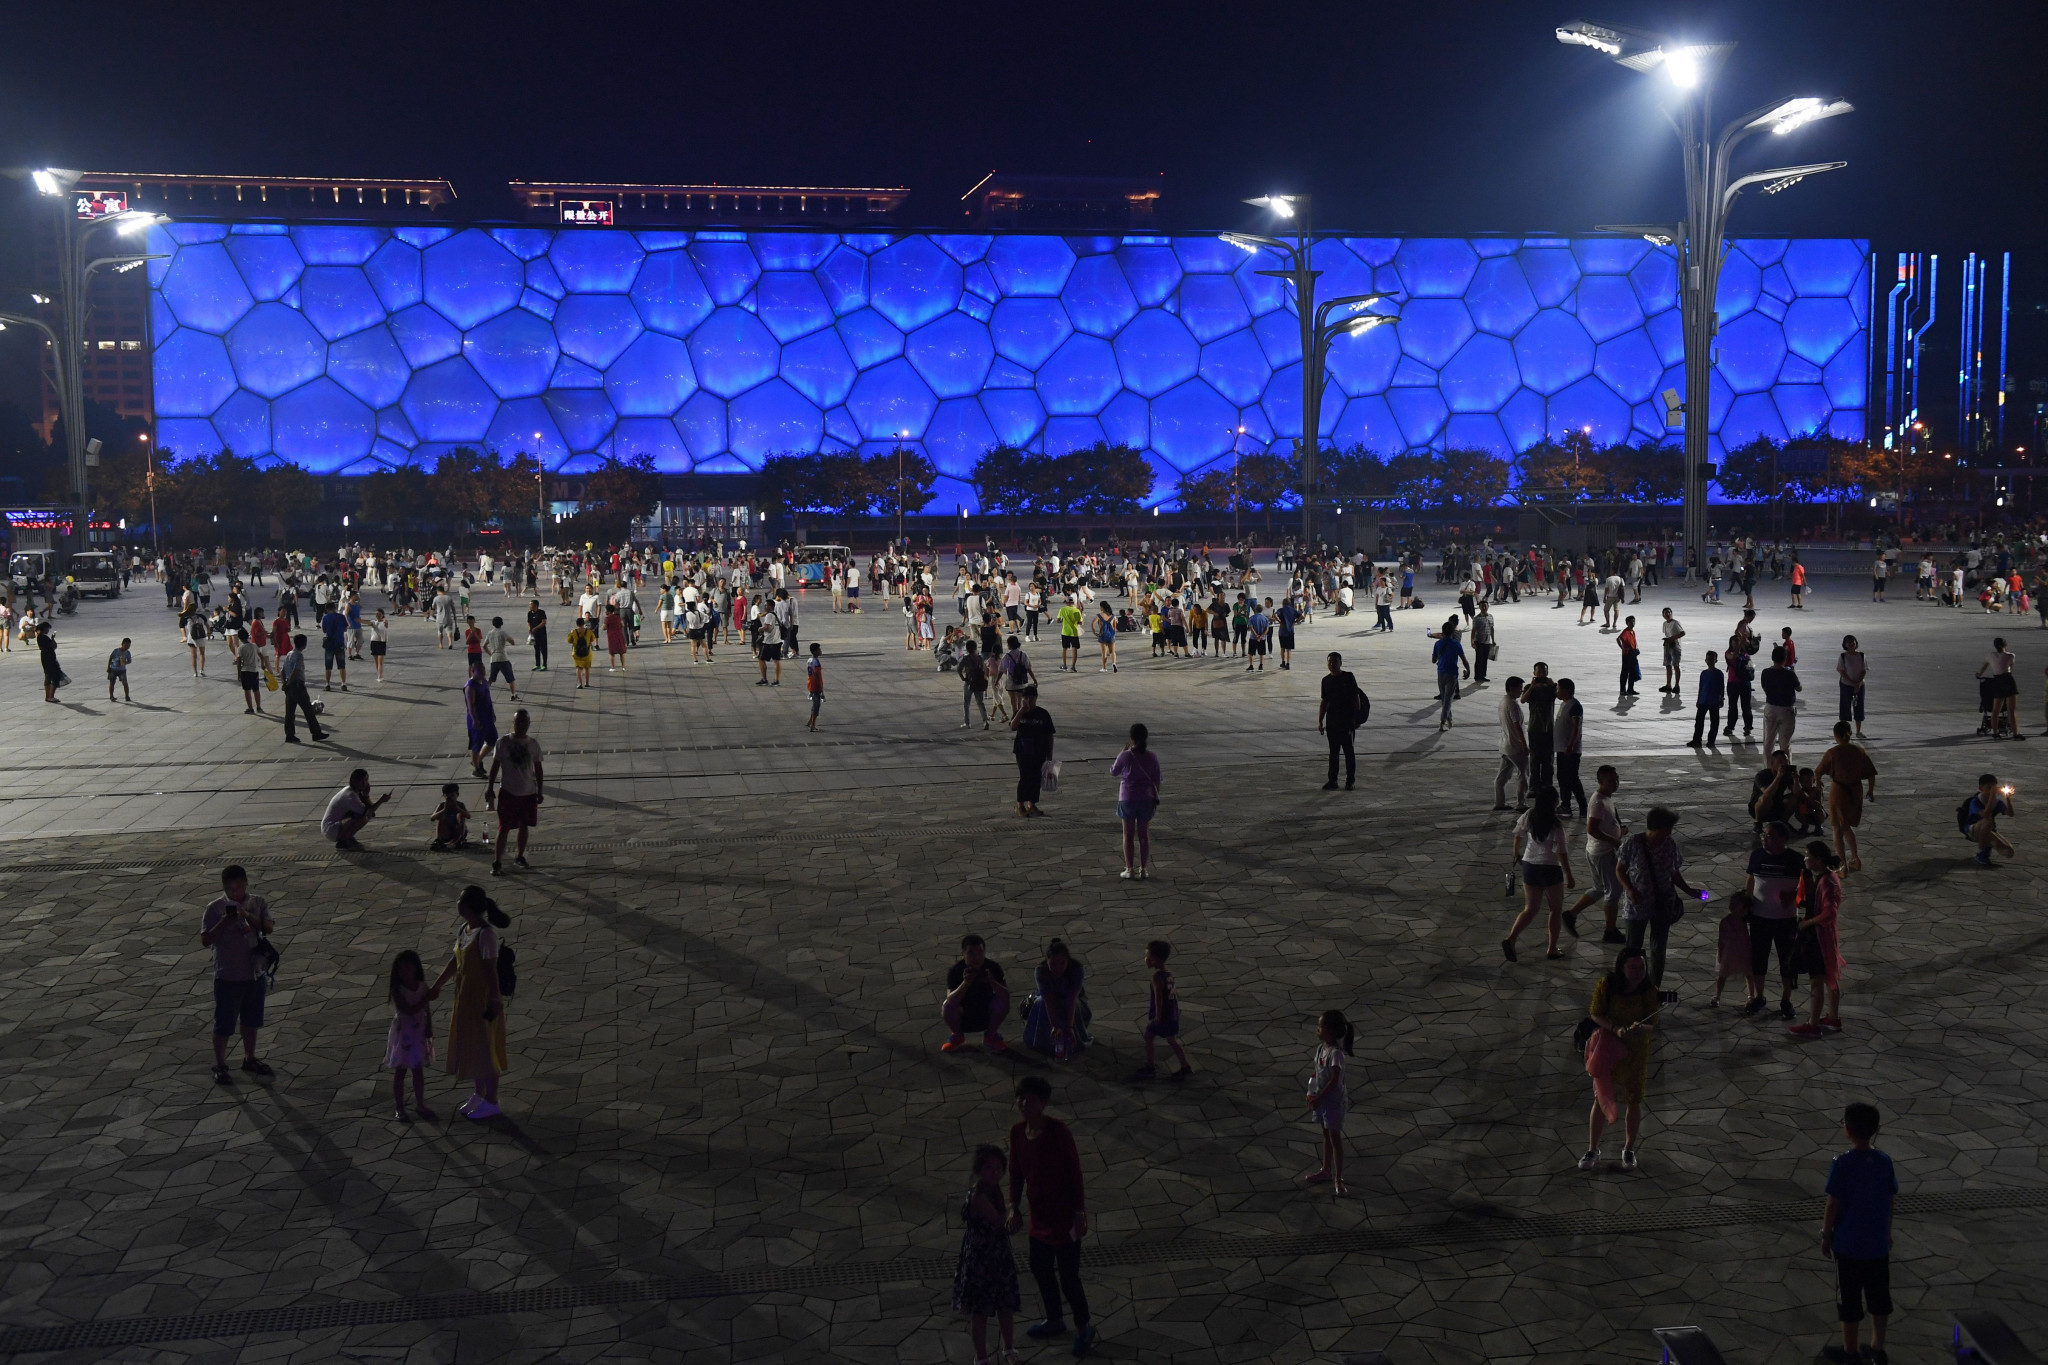 Work begins to turn Water Cube into "Ice Cube" for Beijing 2022